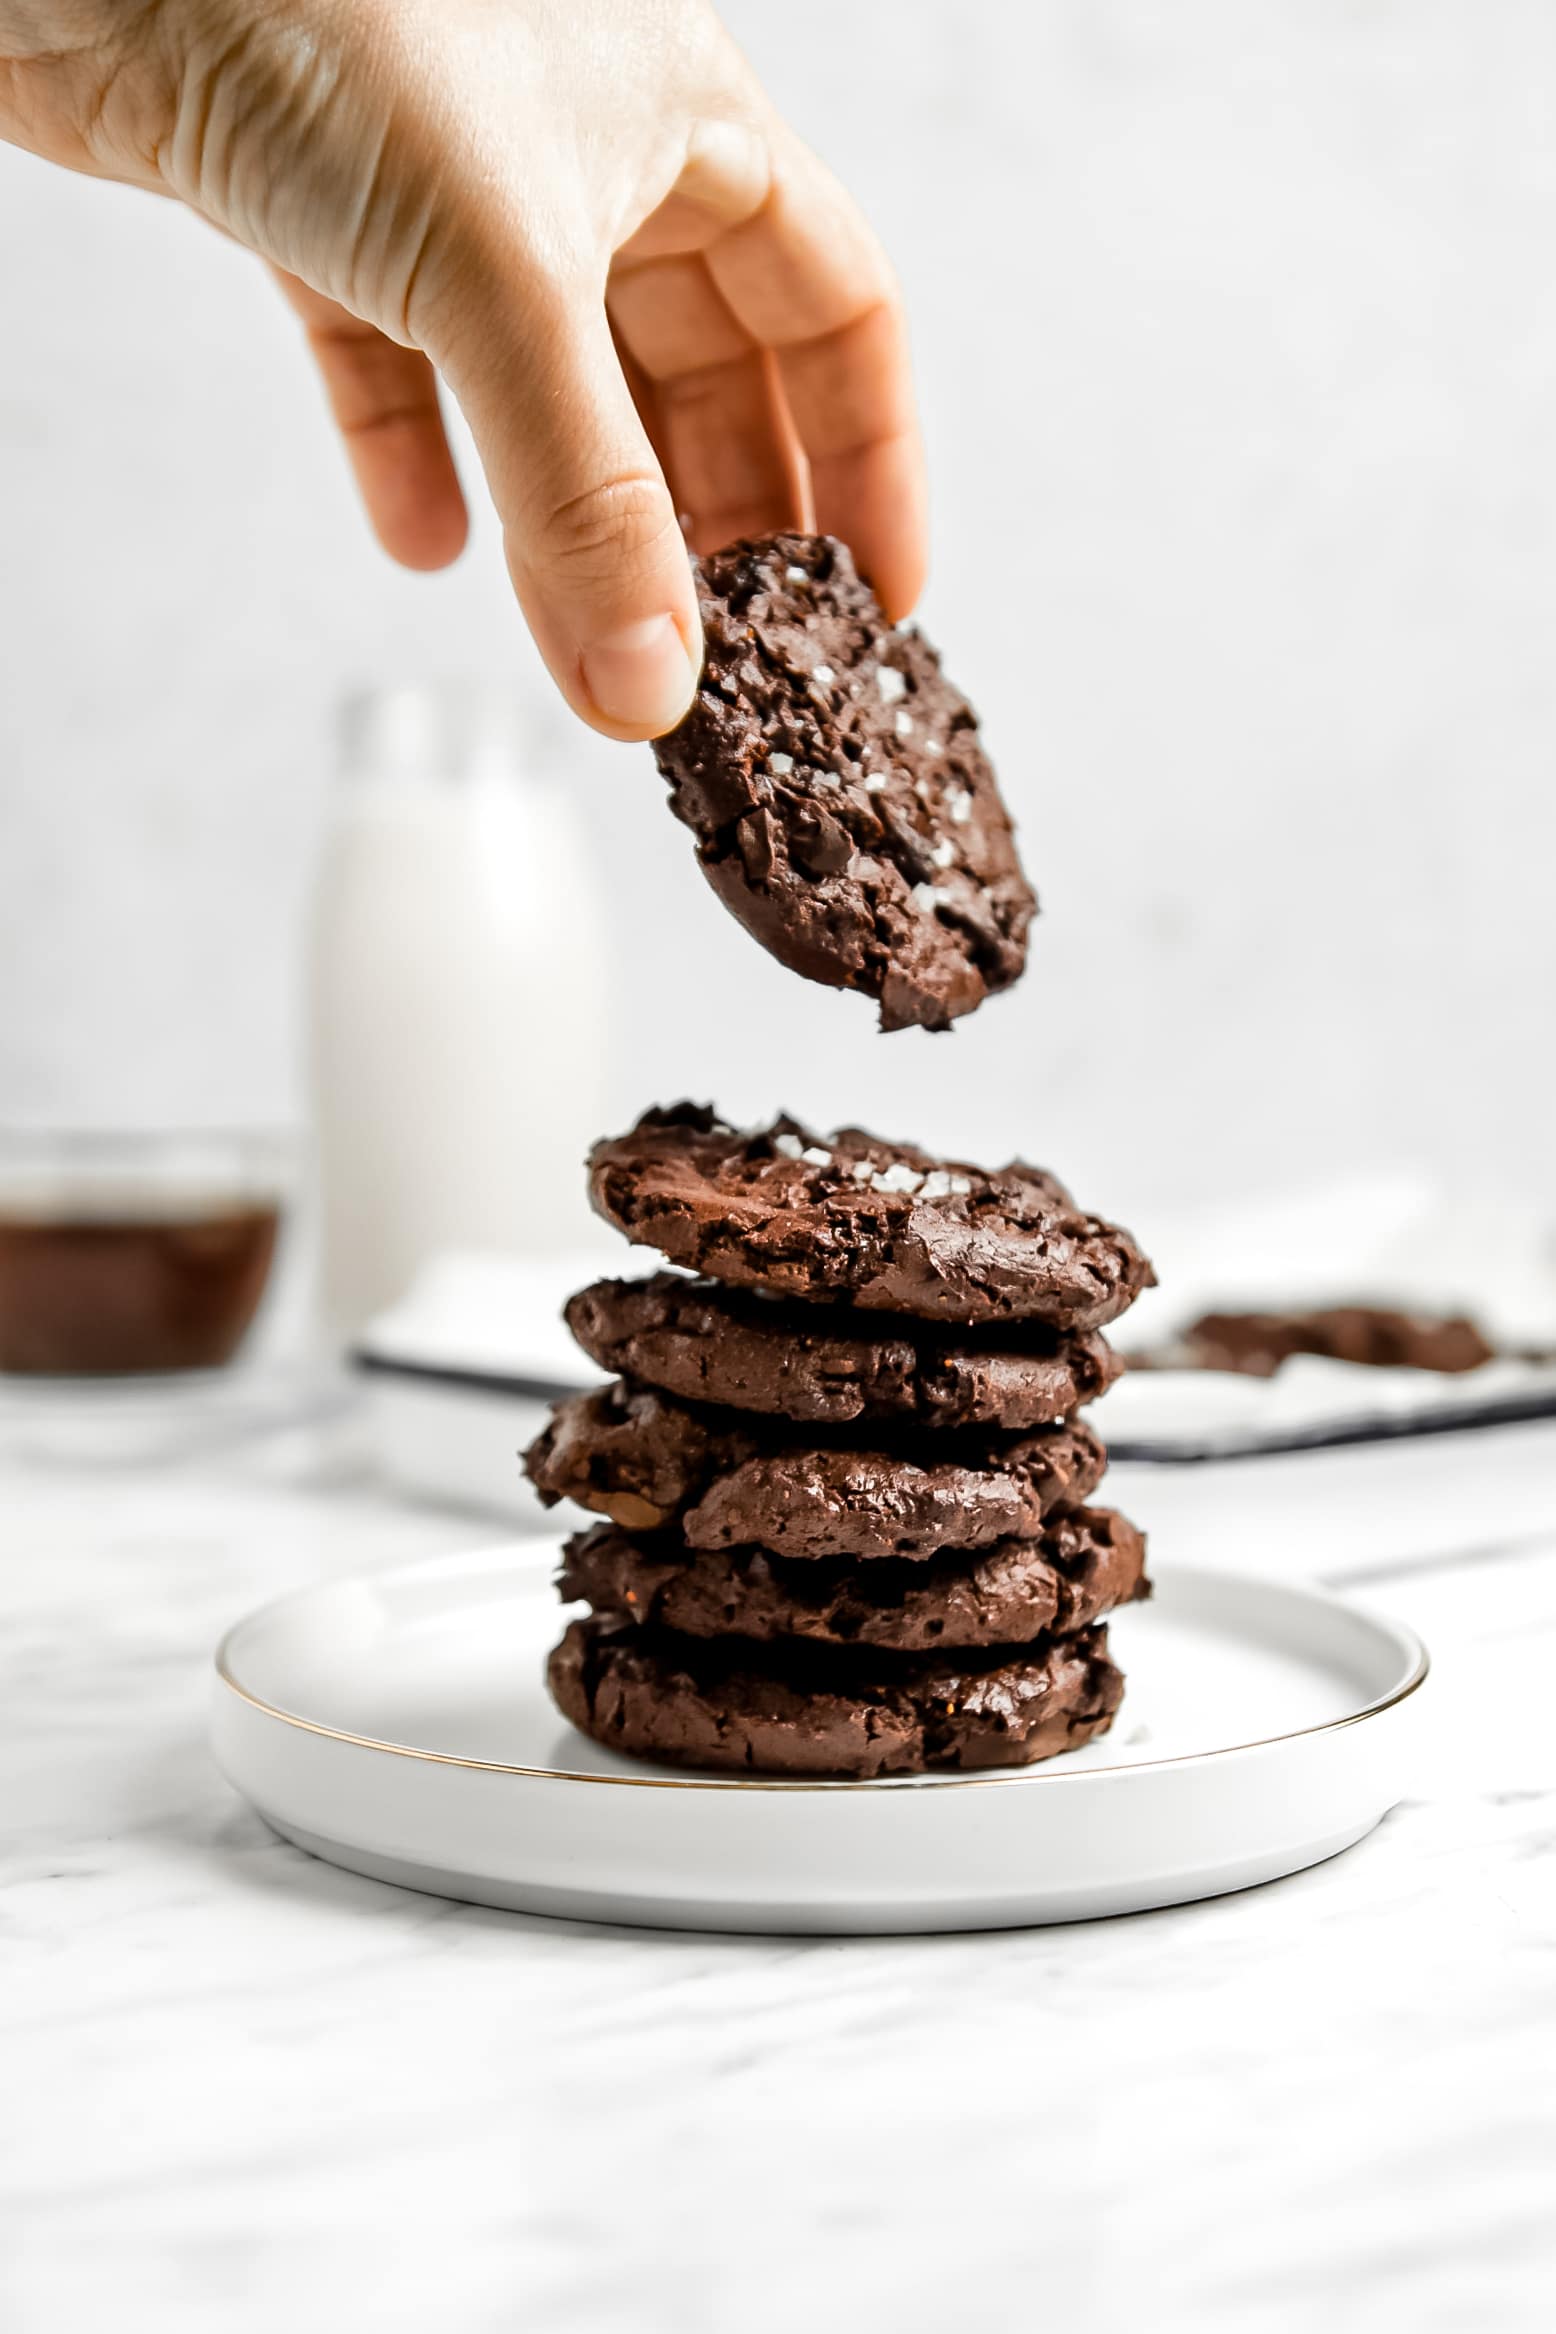 Picture of a stack of chocolate brownie cookies on a small white plate with a hand picking up the cookie on top.